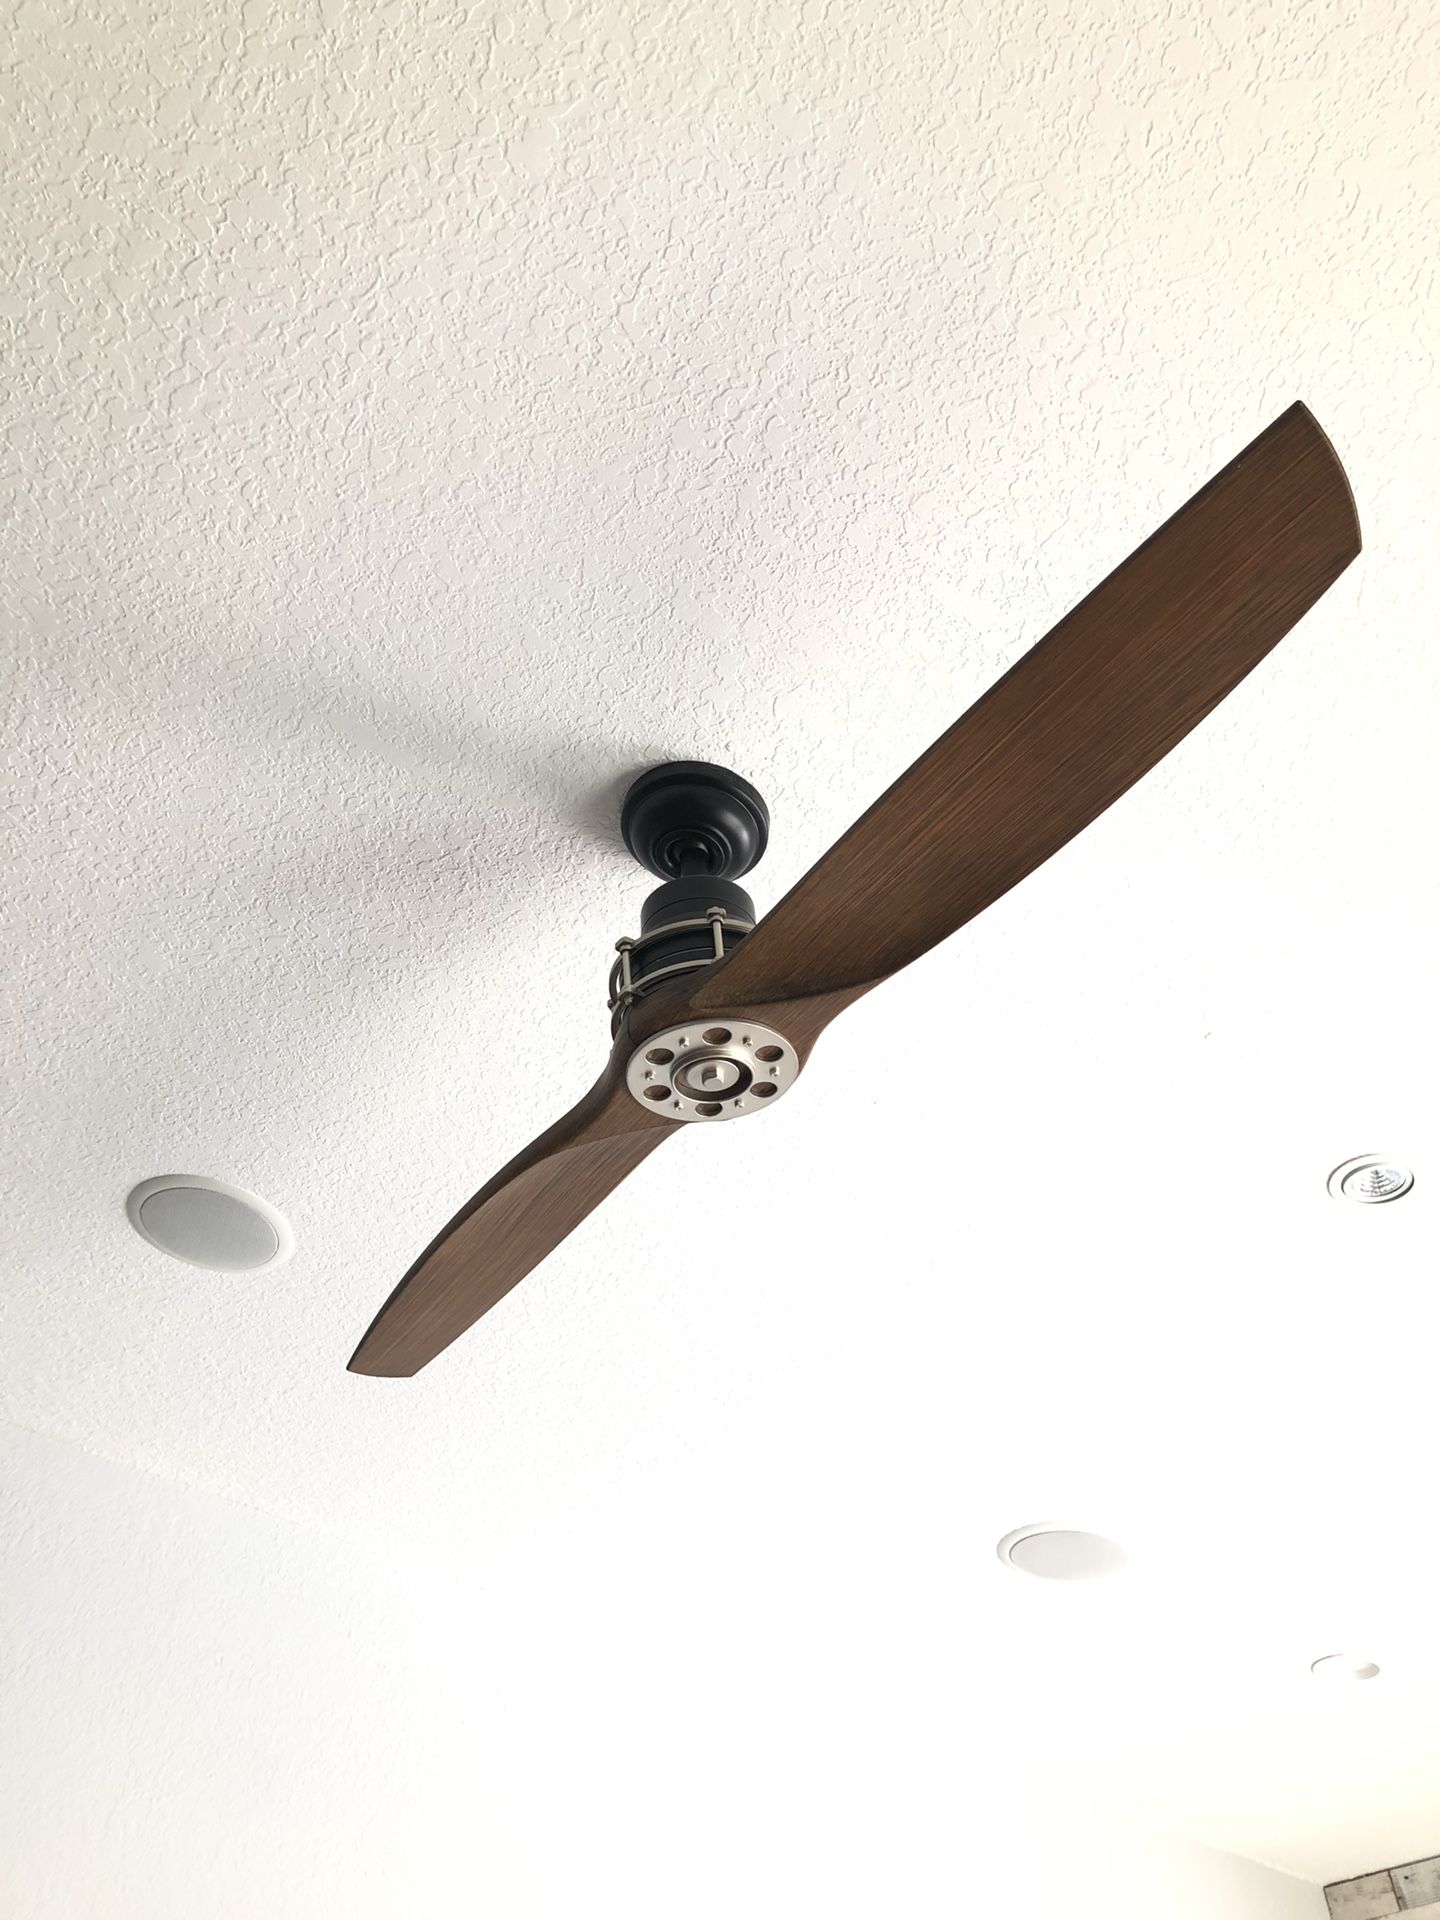 Airplane propeller Ceiling Fan with remote!